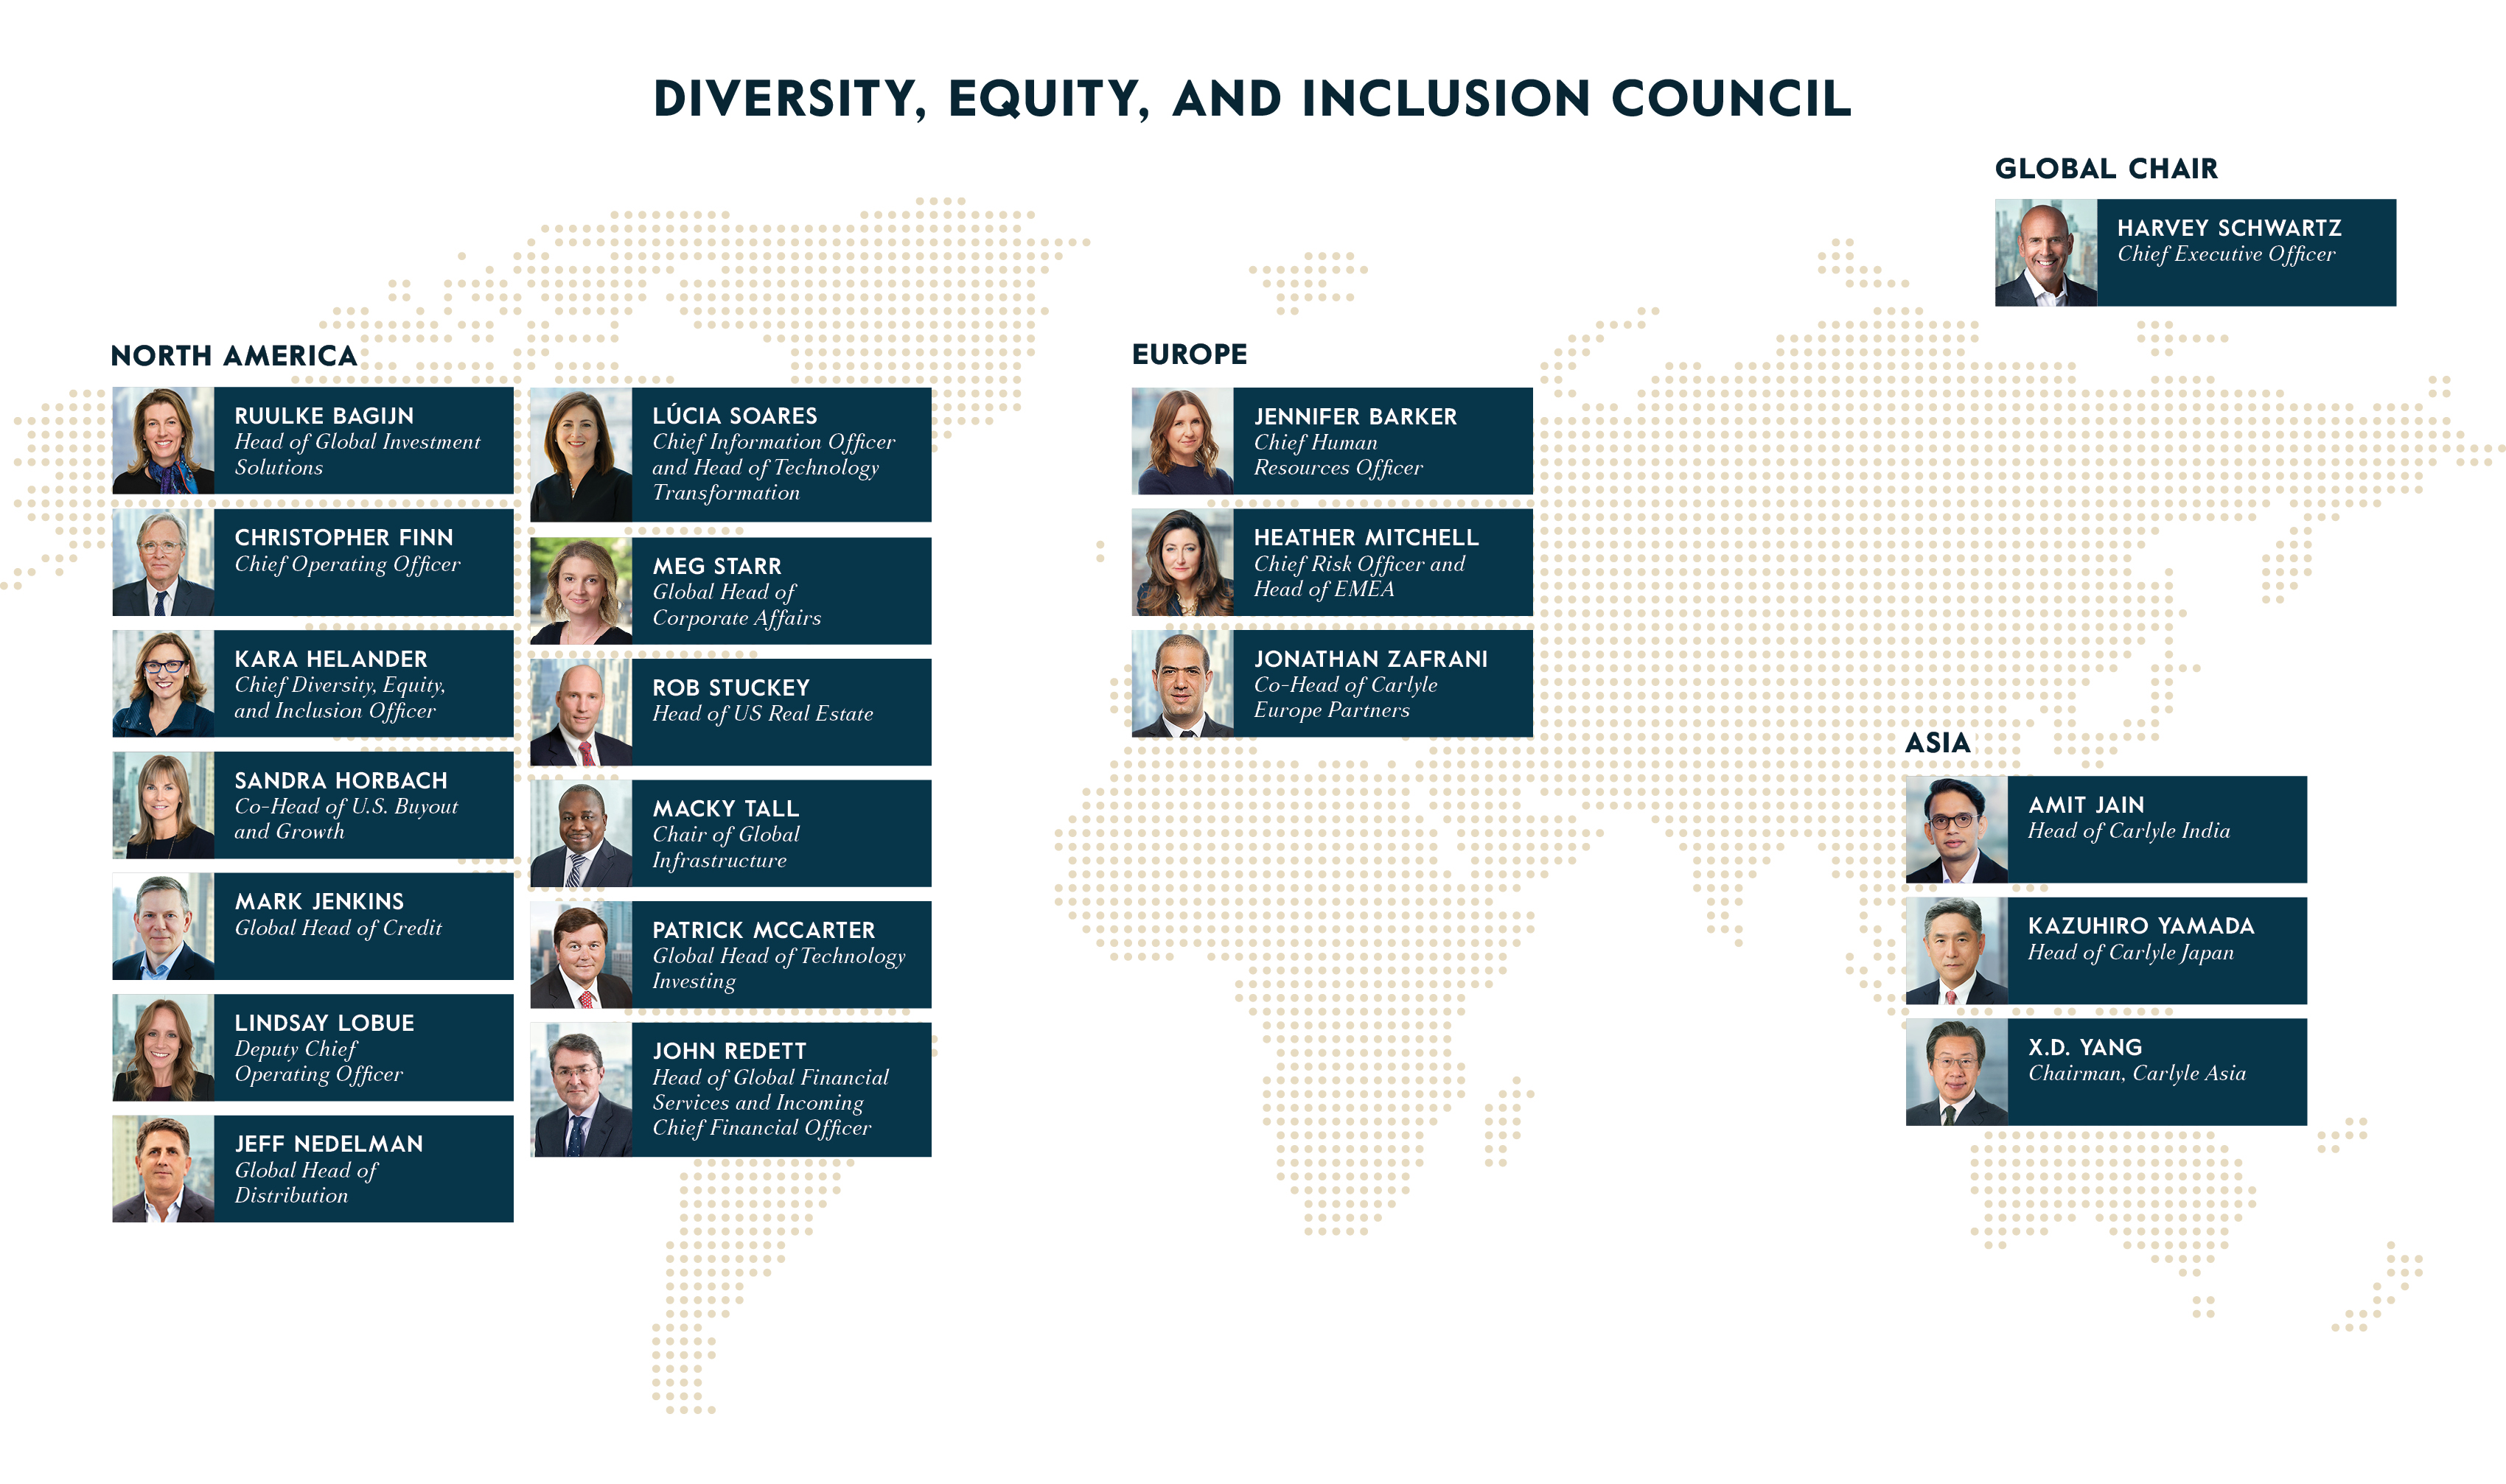 Diversity, Equity, and Inclusion Council